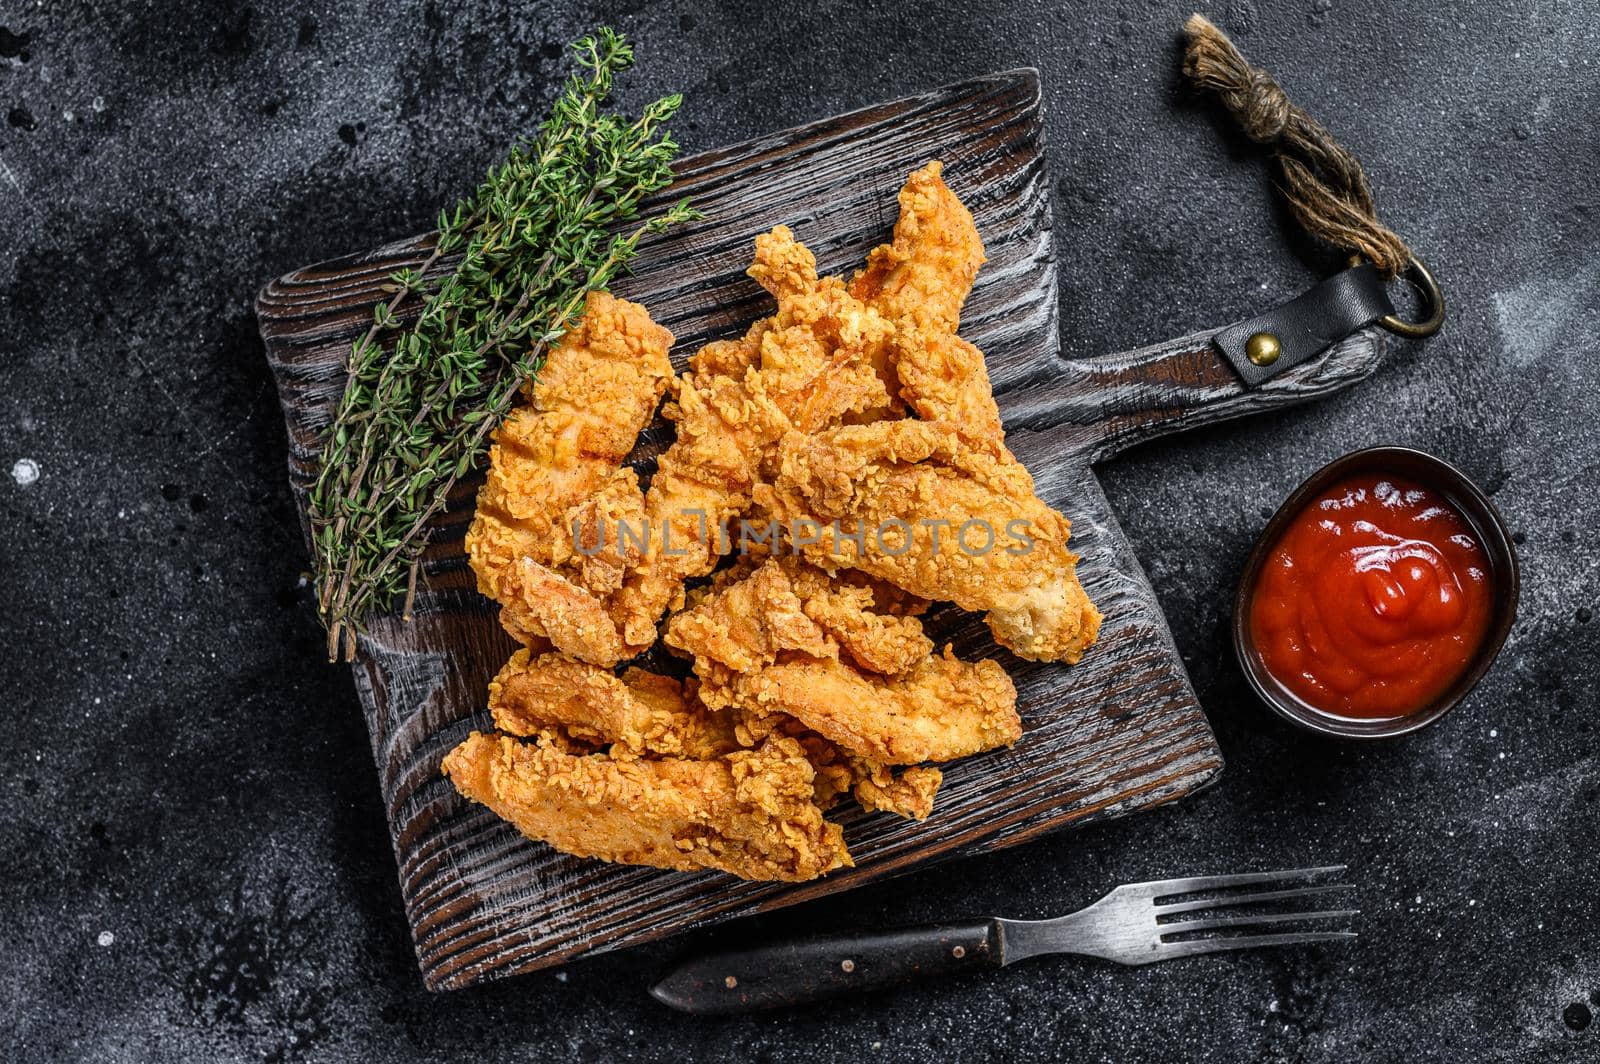 Steak Fingers fried breaded chicken breast strips. Black background. Top view by Composter